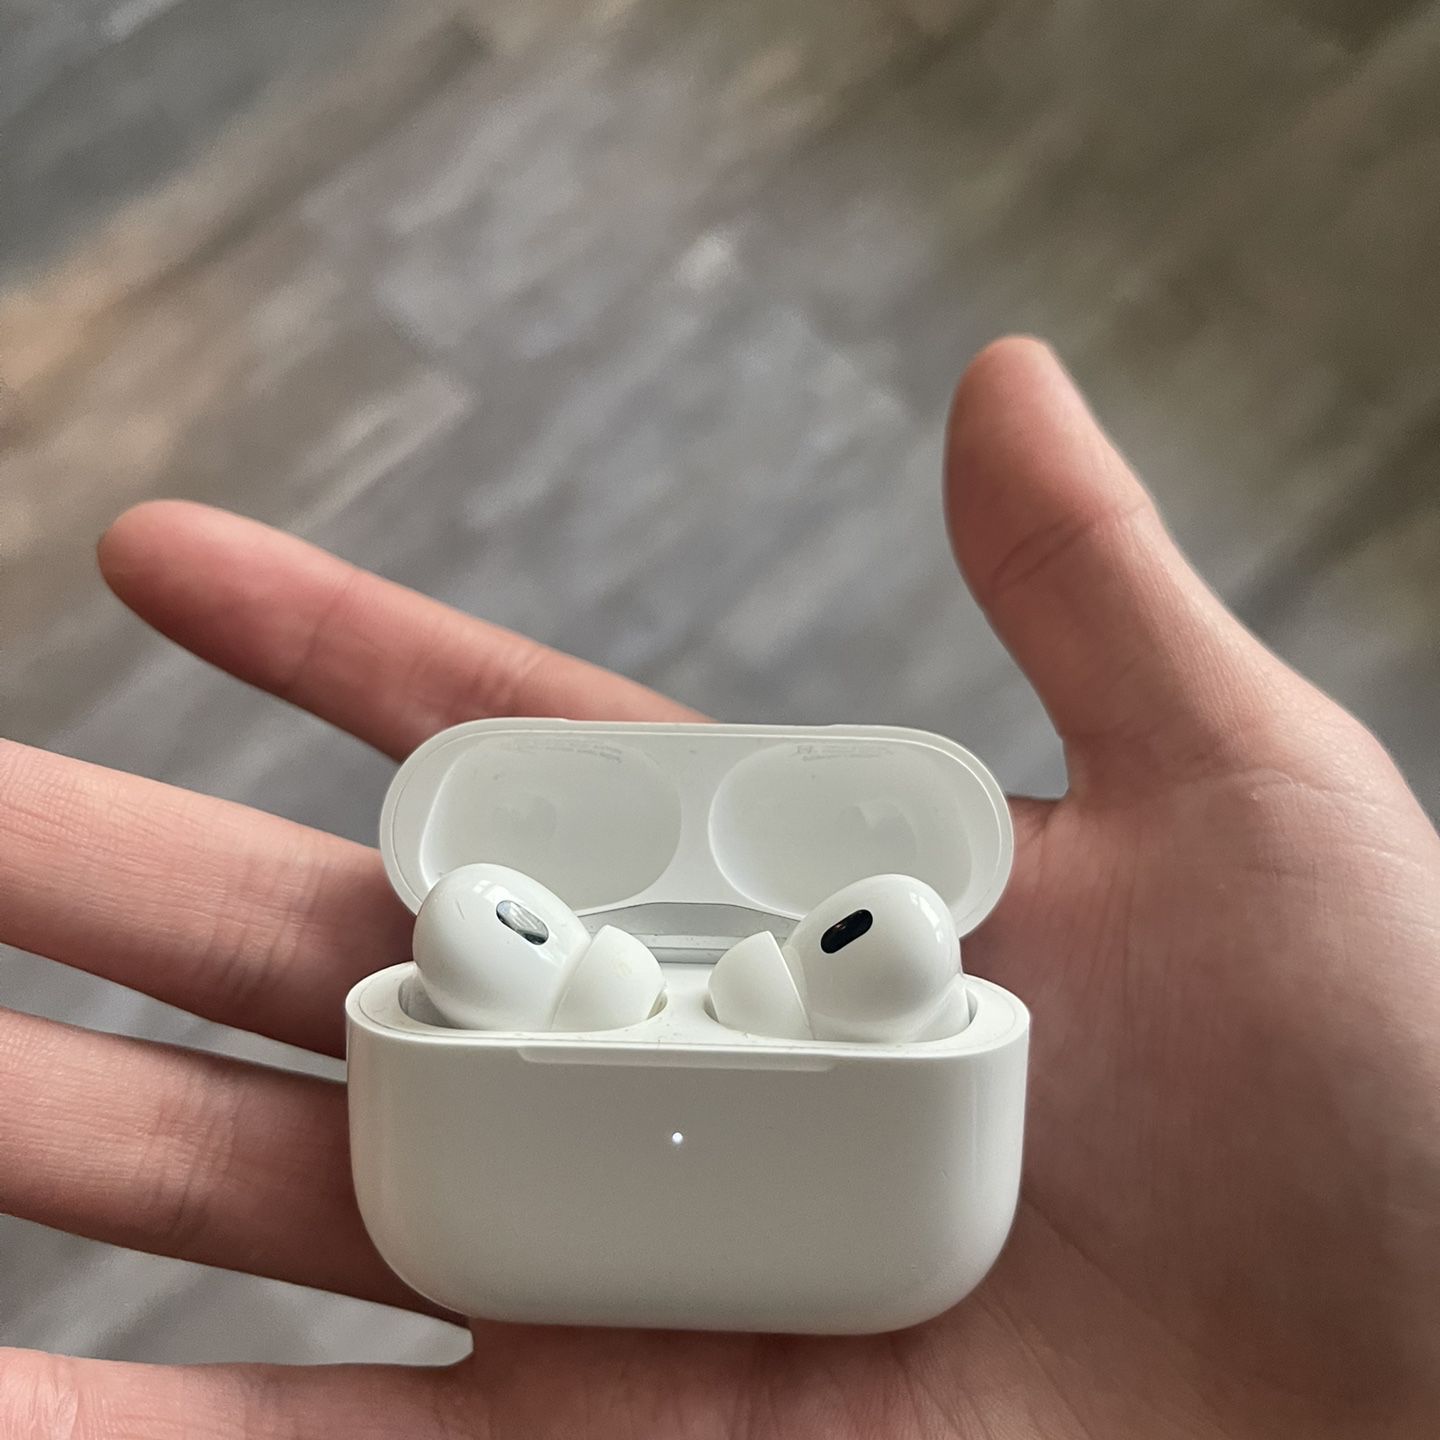 brand new airpods pro 1st generation 